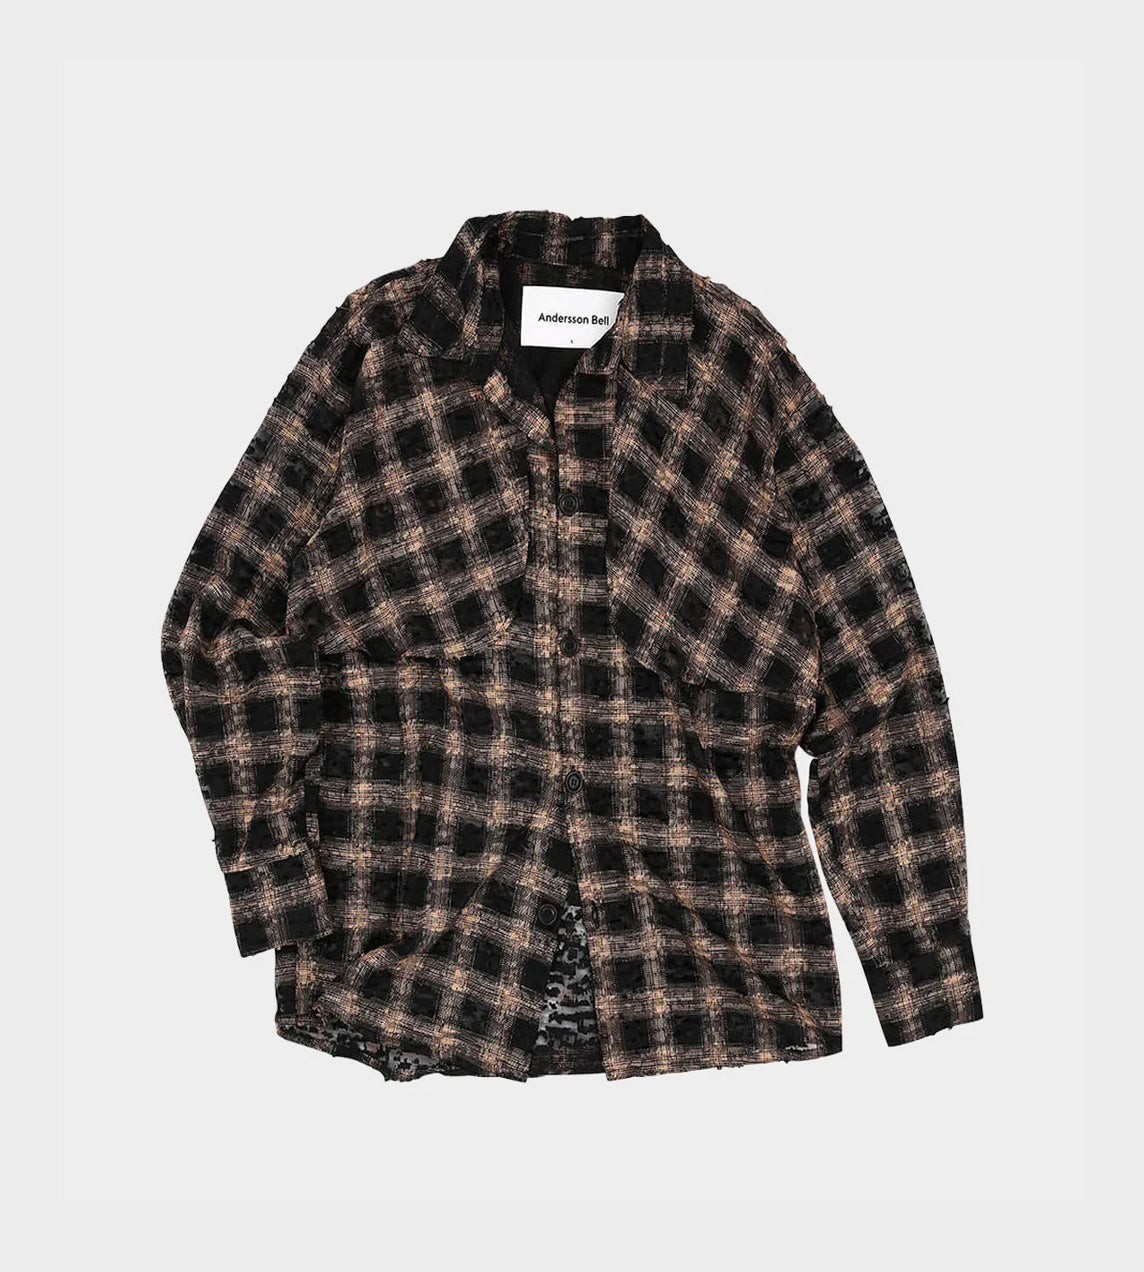 Andersson Bell - Wasser Sheer Checked Shirt Black